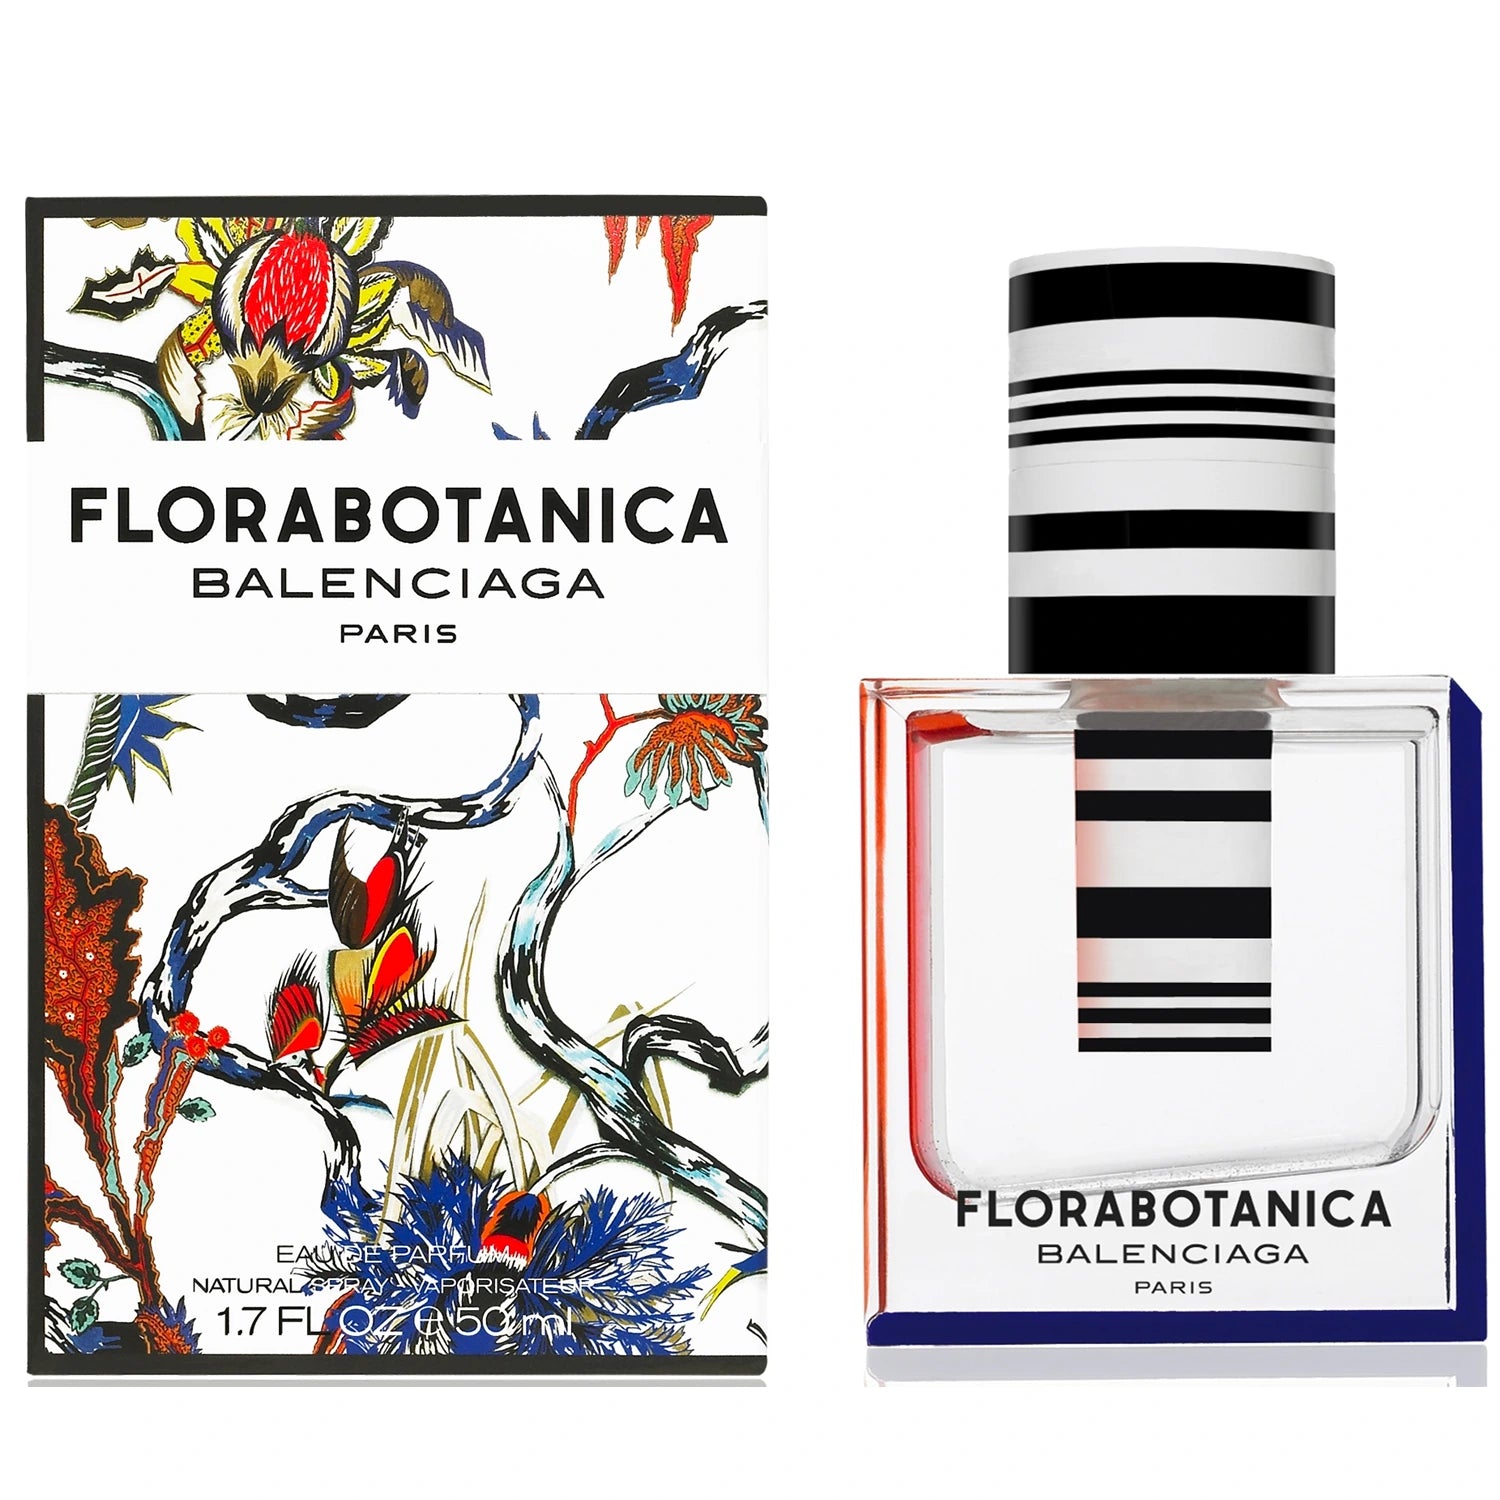 <span data-mce-fragment="1">Delight your senses with the lovely aroma of fresh florals and crisp herbs when you add Florabotanica eau de parfum spray as the finishing touch to your ensemble. Introduced in 2012 by Balenciaga, this delightful fragrance starts off with refreshing mint top notes, while rose and carnation heart notes sweeten up the center. Rich amber at the base lingers warmly as the scent dries down. The unique blend of notes results in a light, welcoming fragrance that wears well in both formal and casual settings.</span>